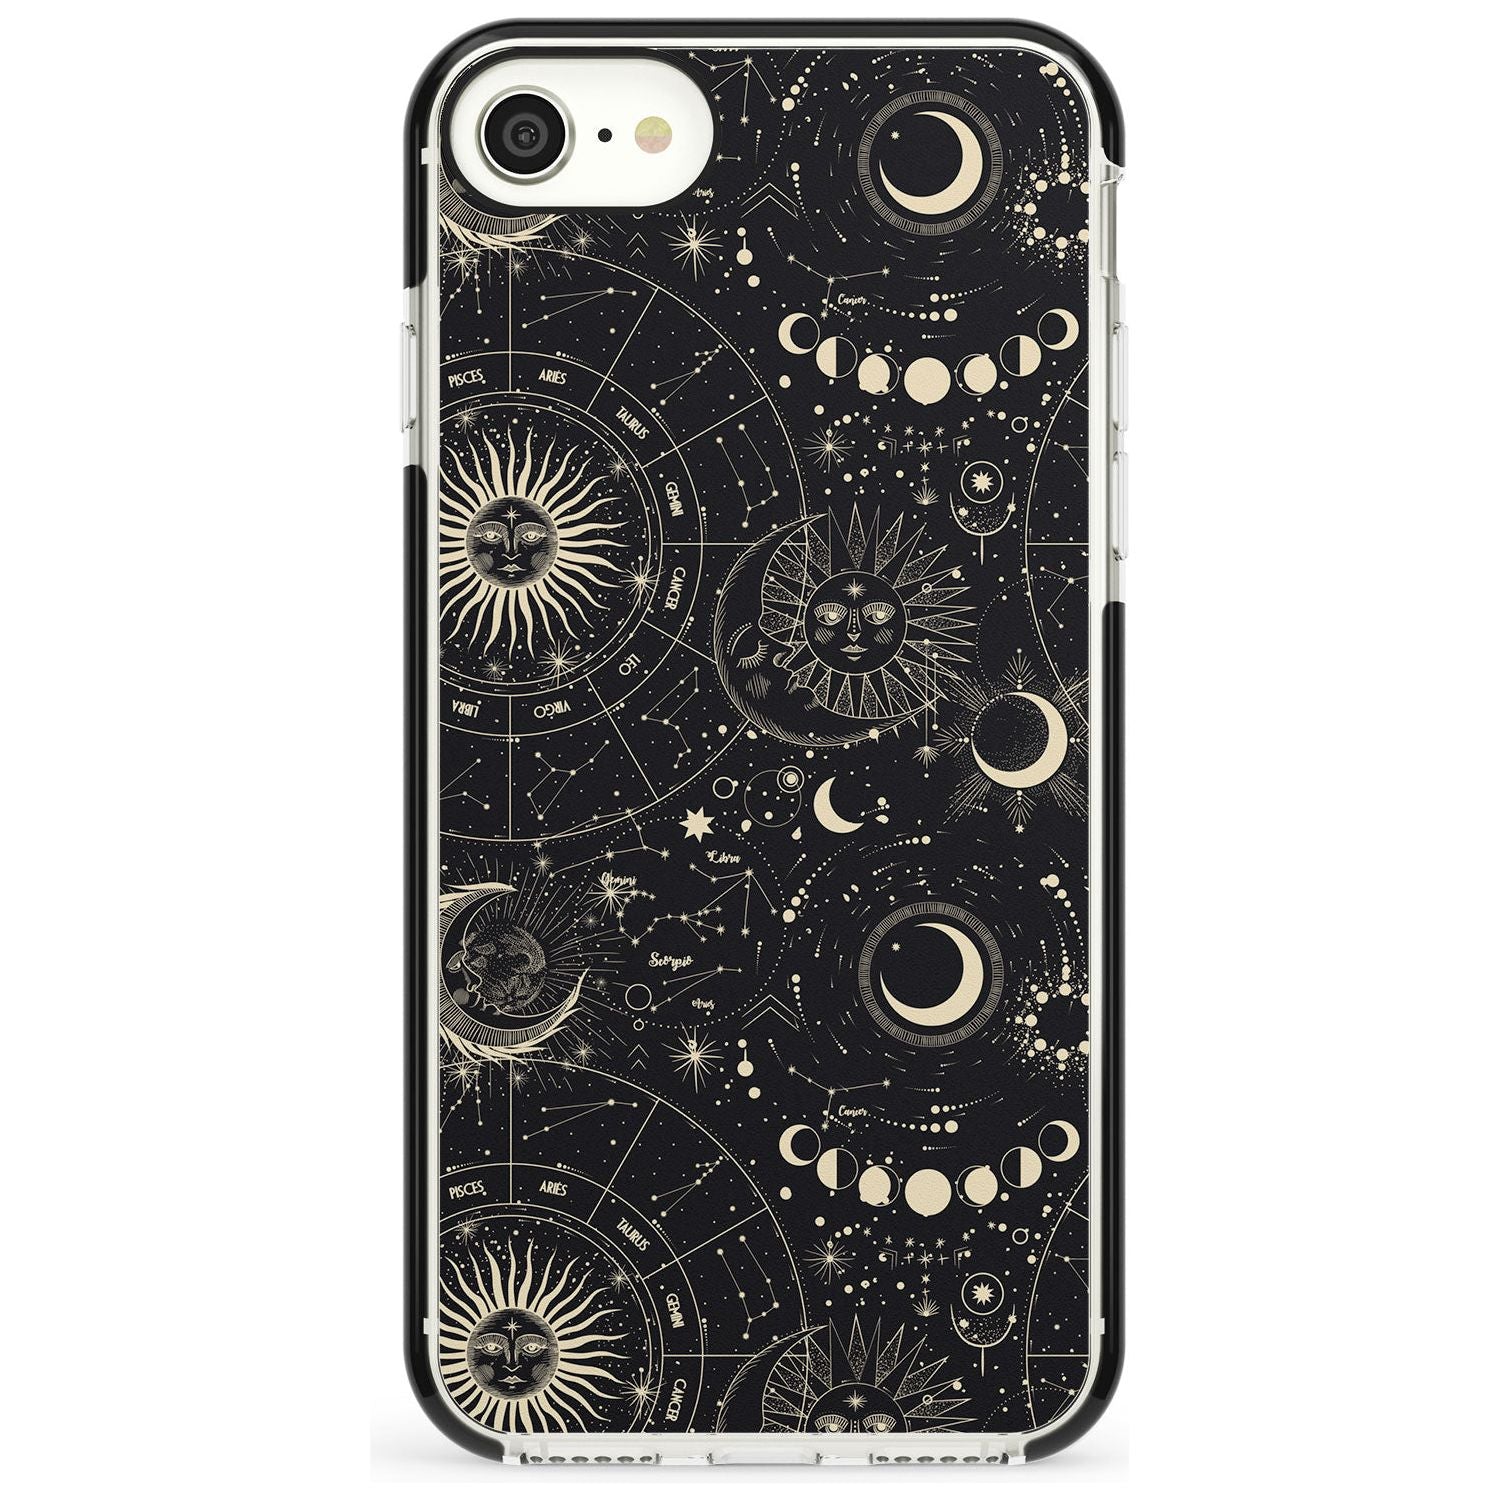 Suns, Moons & Star Signs Pink Fade Impact Phone Case for iPhone SE 8 7 Plus